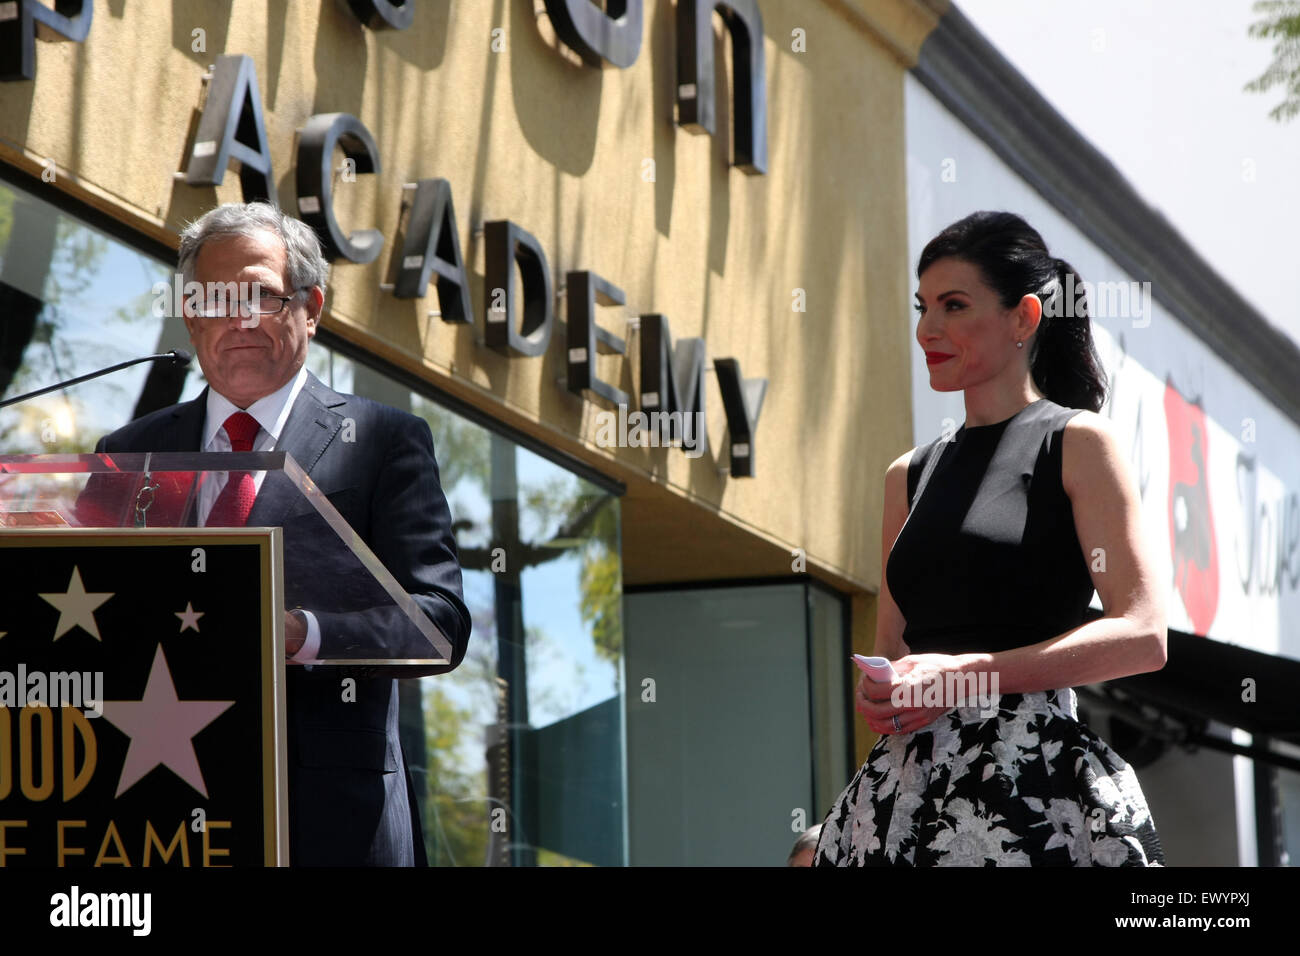 Julianna Margulies honored with a star on the Hollywood Walk of Fame  Featuring: Les Moonves, Julianna Margulies Where: Los Angeles, California, United States When: 01 May 2015 C Stock Photo